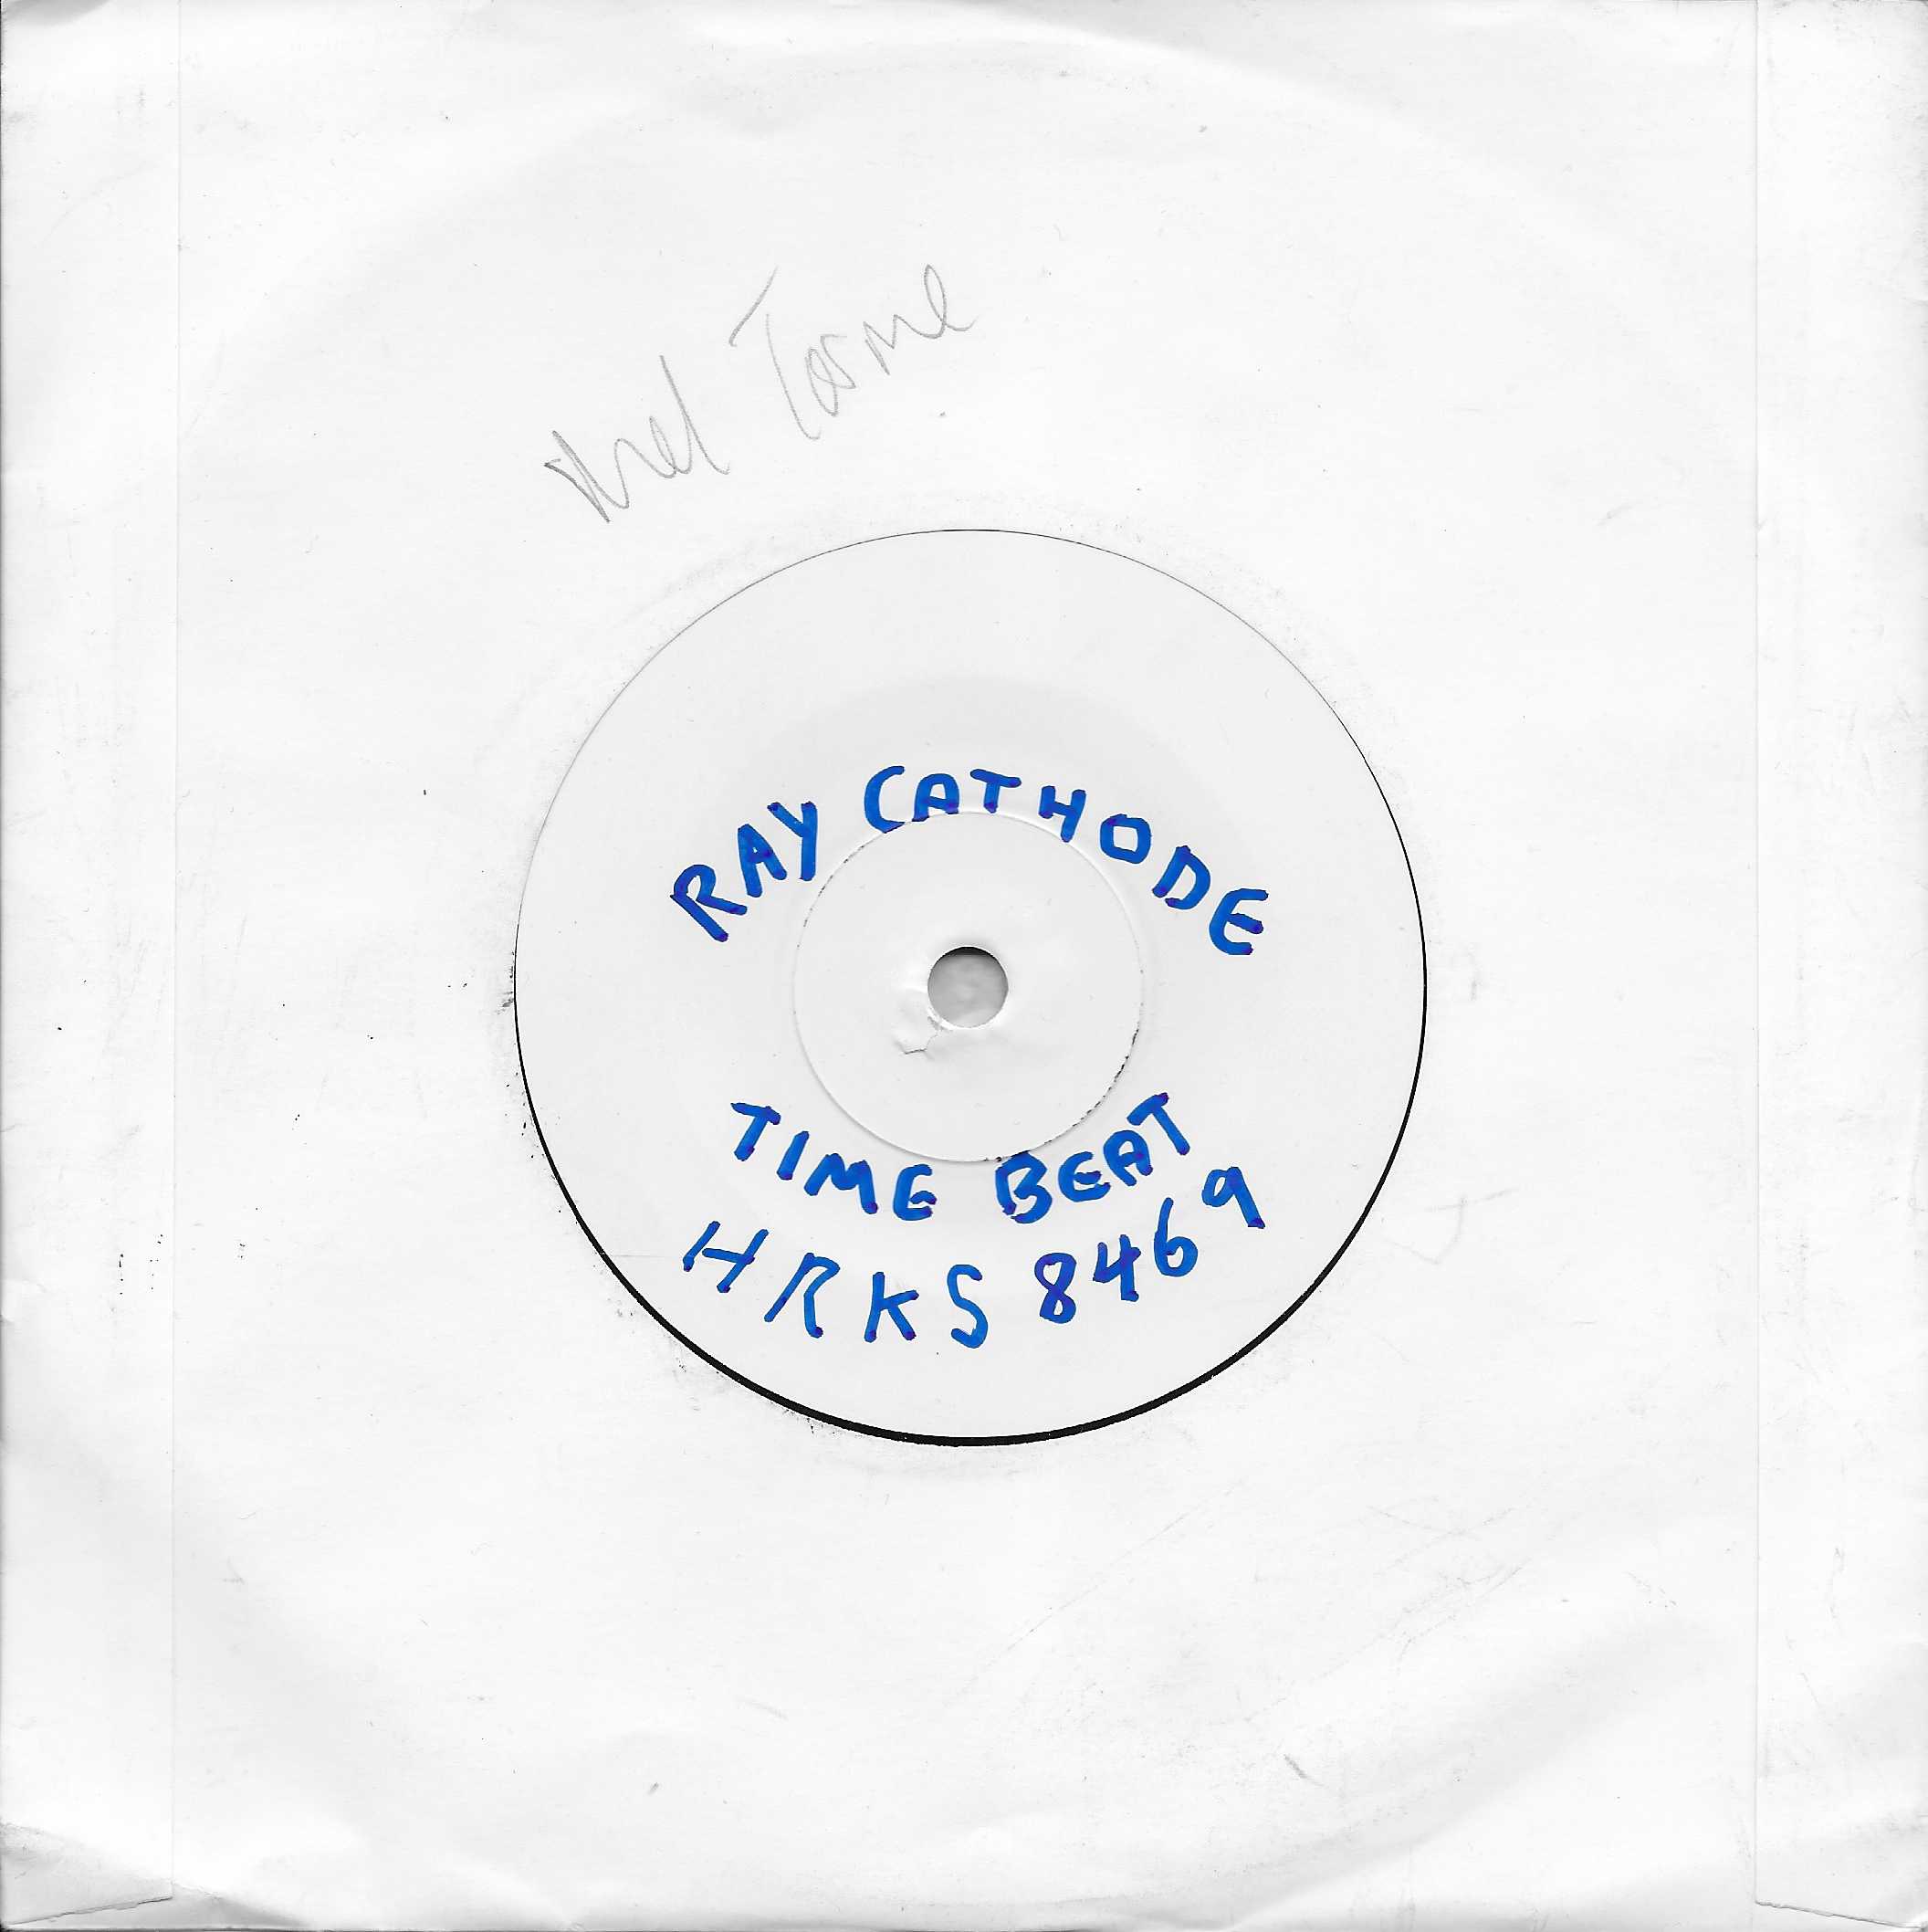 Picture of HRKS 8469 W Doctor Who - 50th anniversary edition (White label test pressing) by artist Ron Grainer / Delia Derbyshire / BBC Radiophonic Workshop / Fagandini / Ray Cathode from the BBC singles - Records and Tapes library